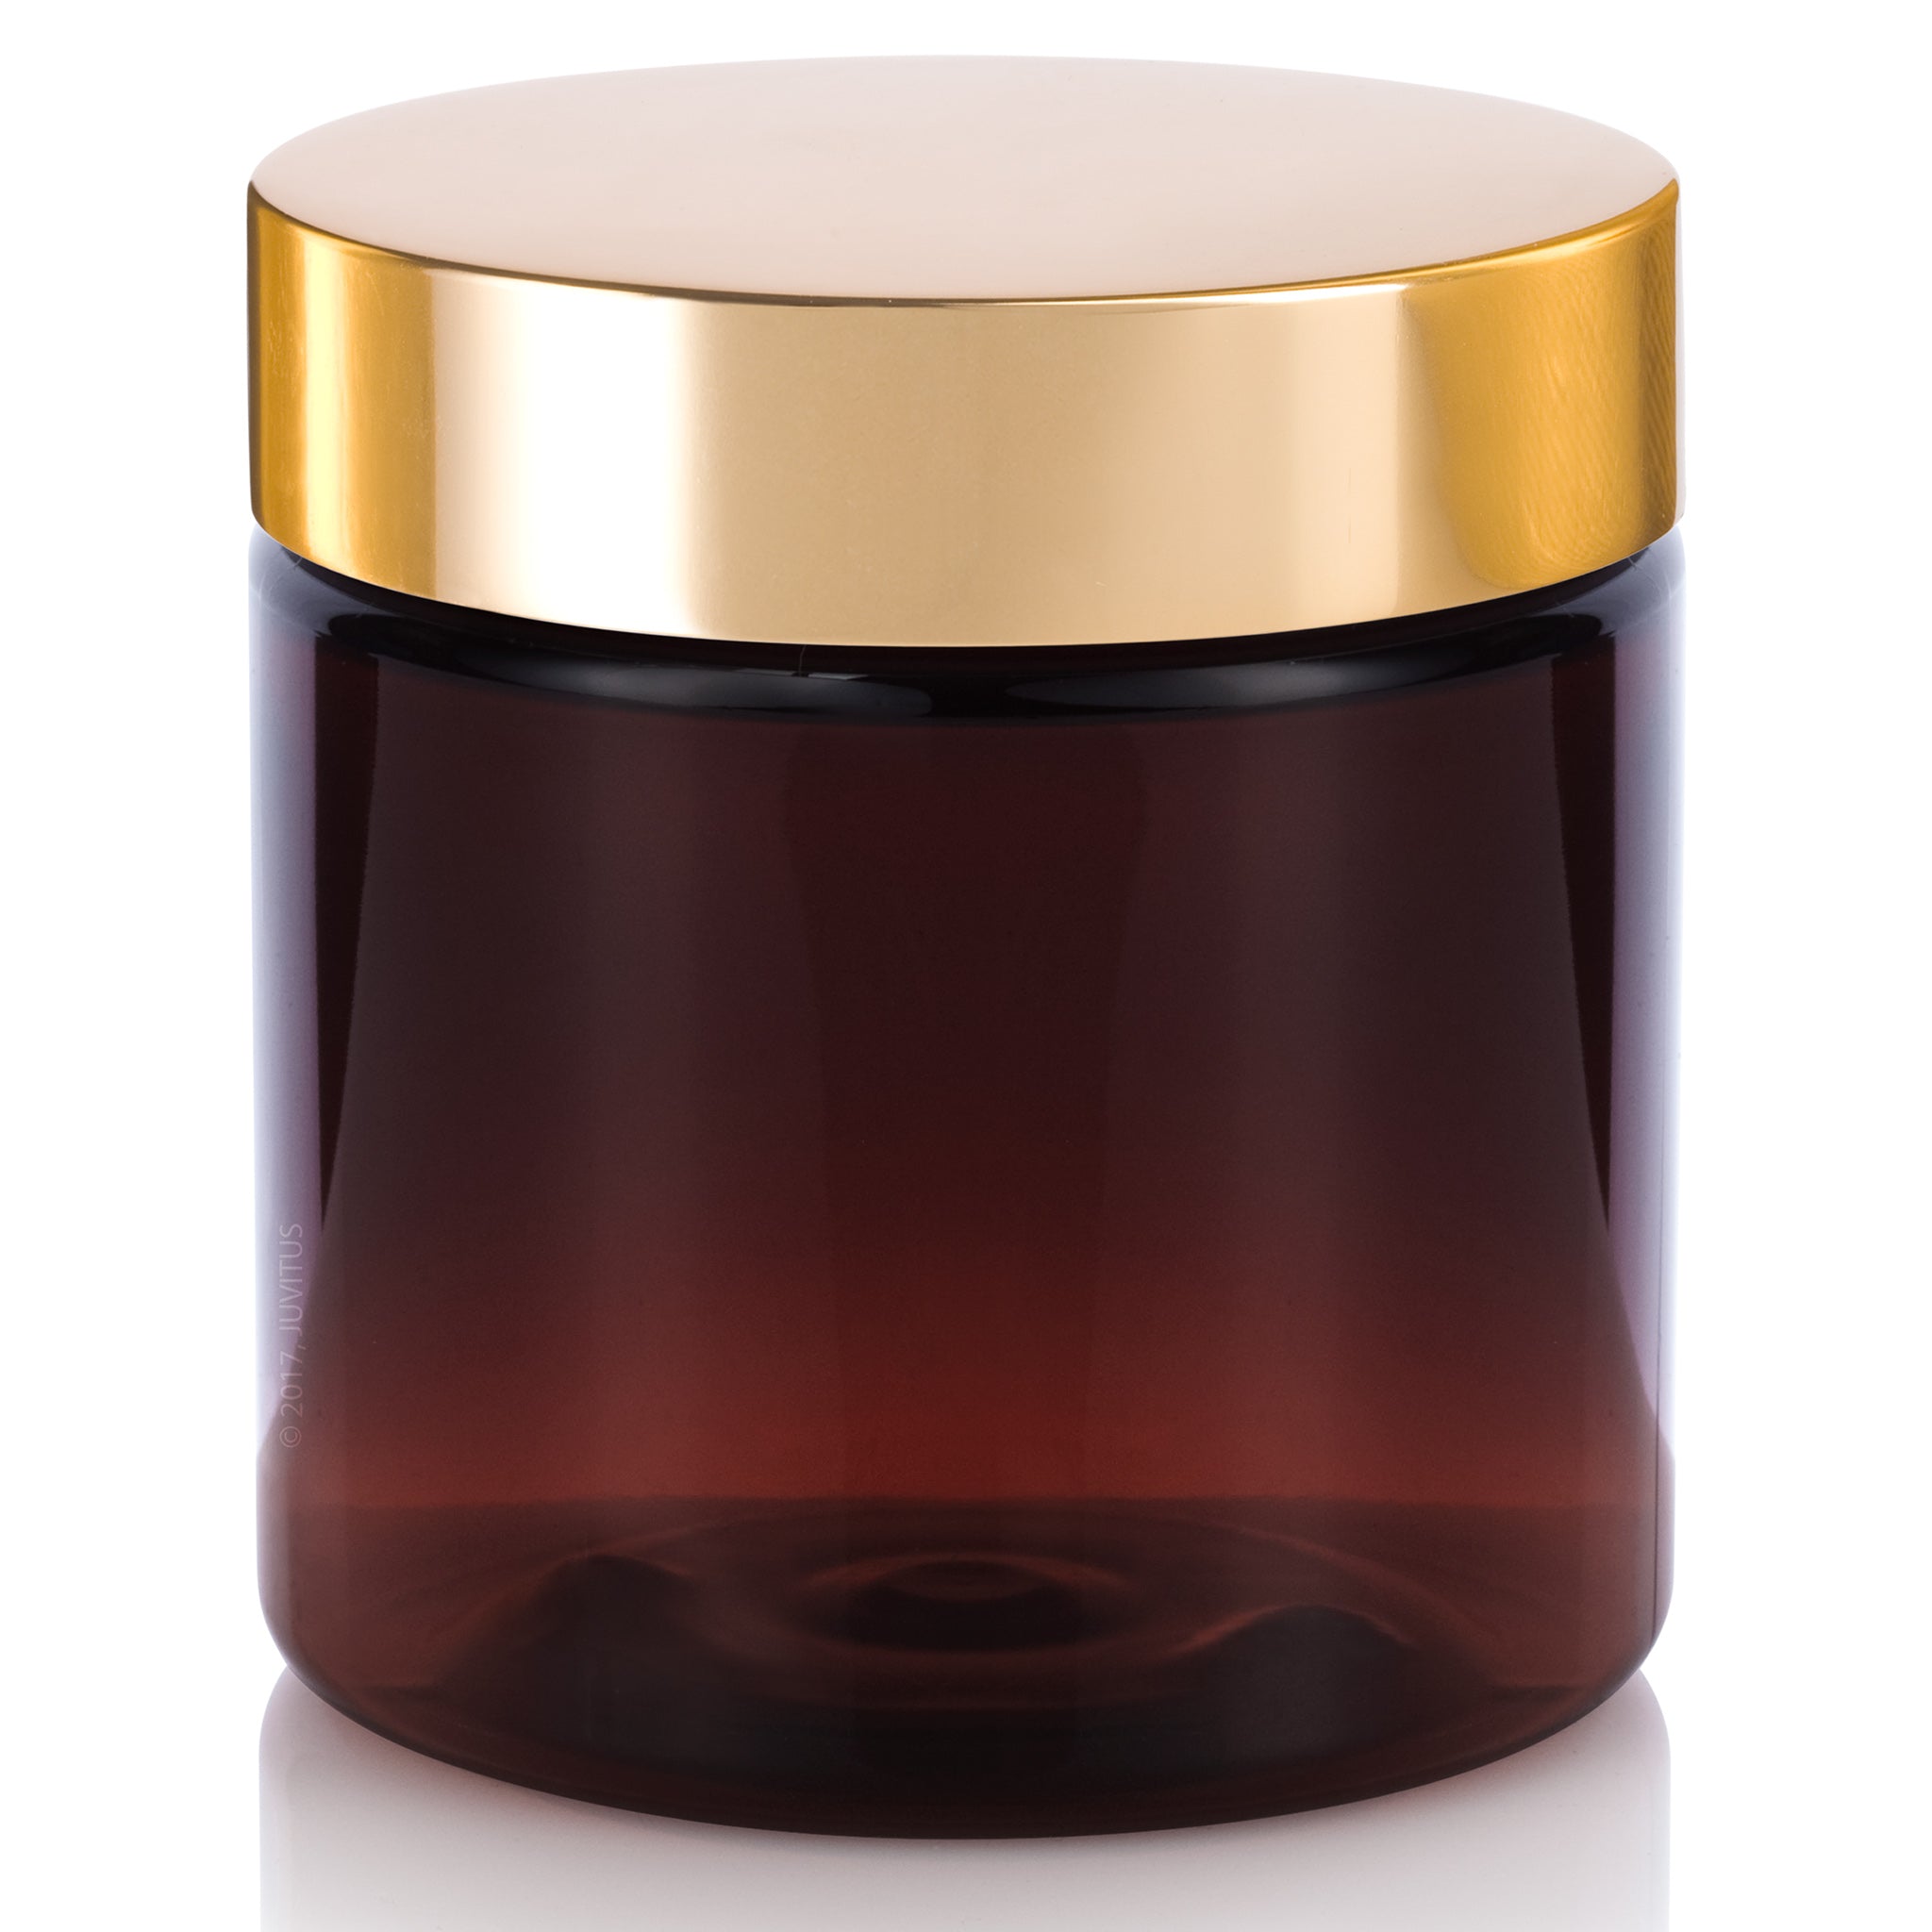 6 oz Clear Straight Sided Glass Jar with Gold Lid